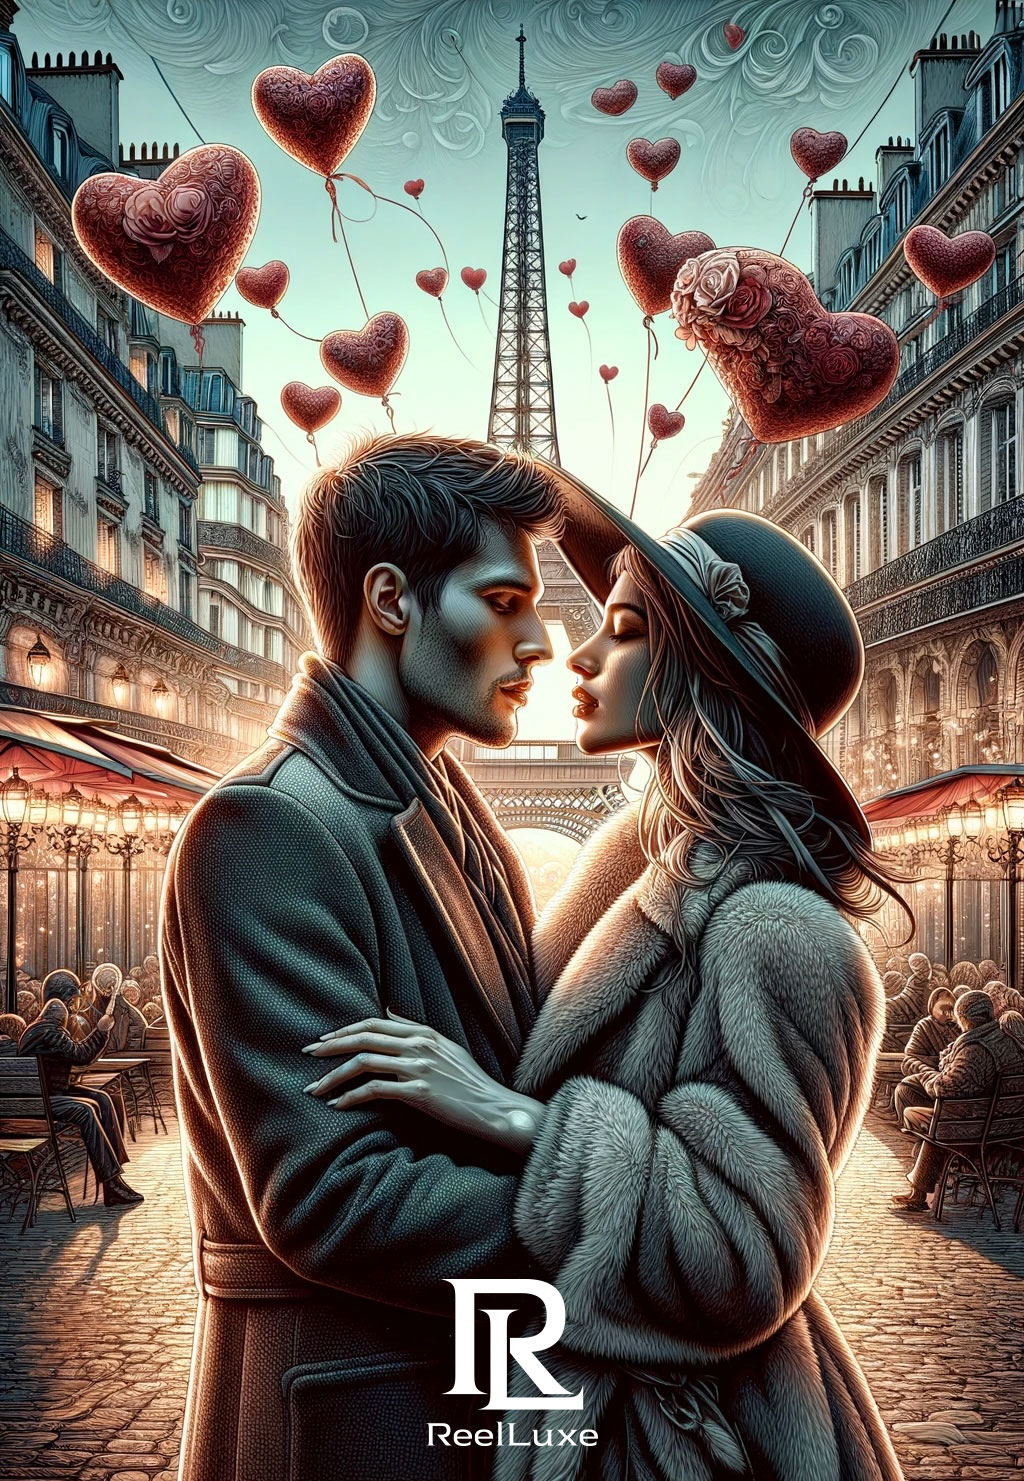 Romance in the Air - Valentine's Day - Beauty and Fashion - Paris, France - 4